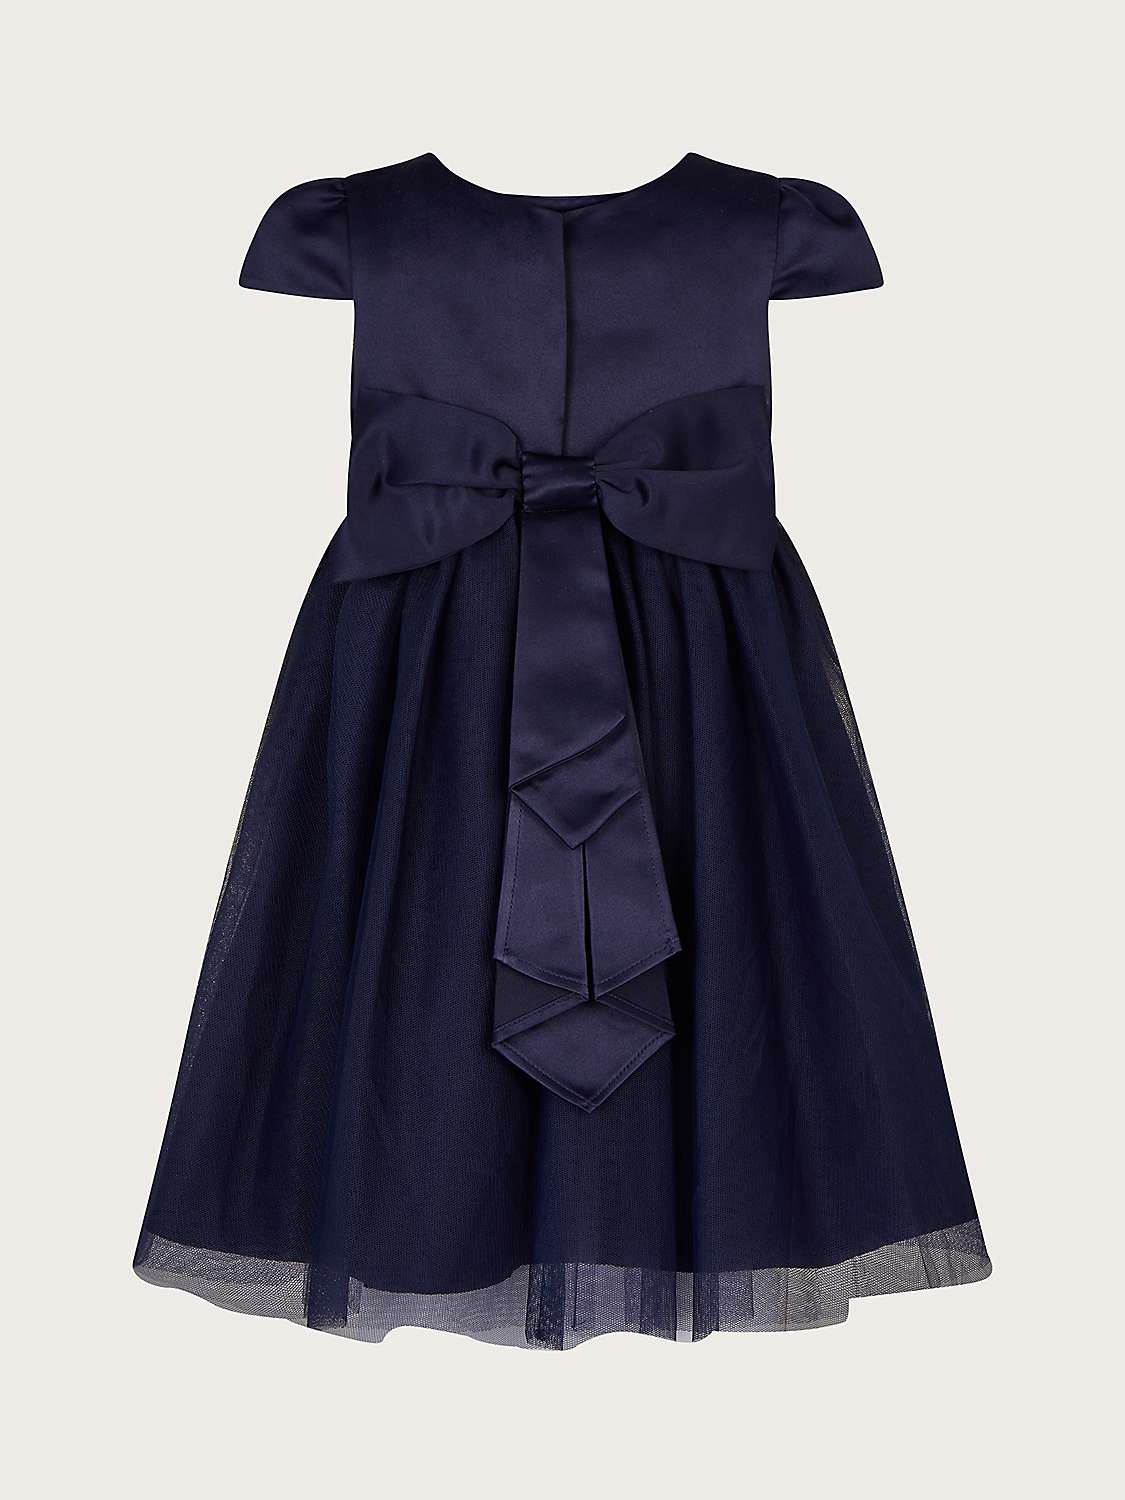 Buy Monsoon Baby Tulle Bridesmaid Dress, Navy Online at johnlewis.com